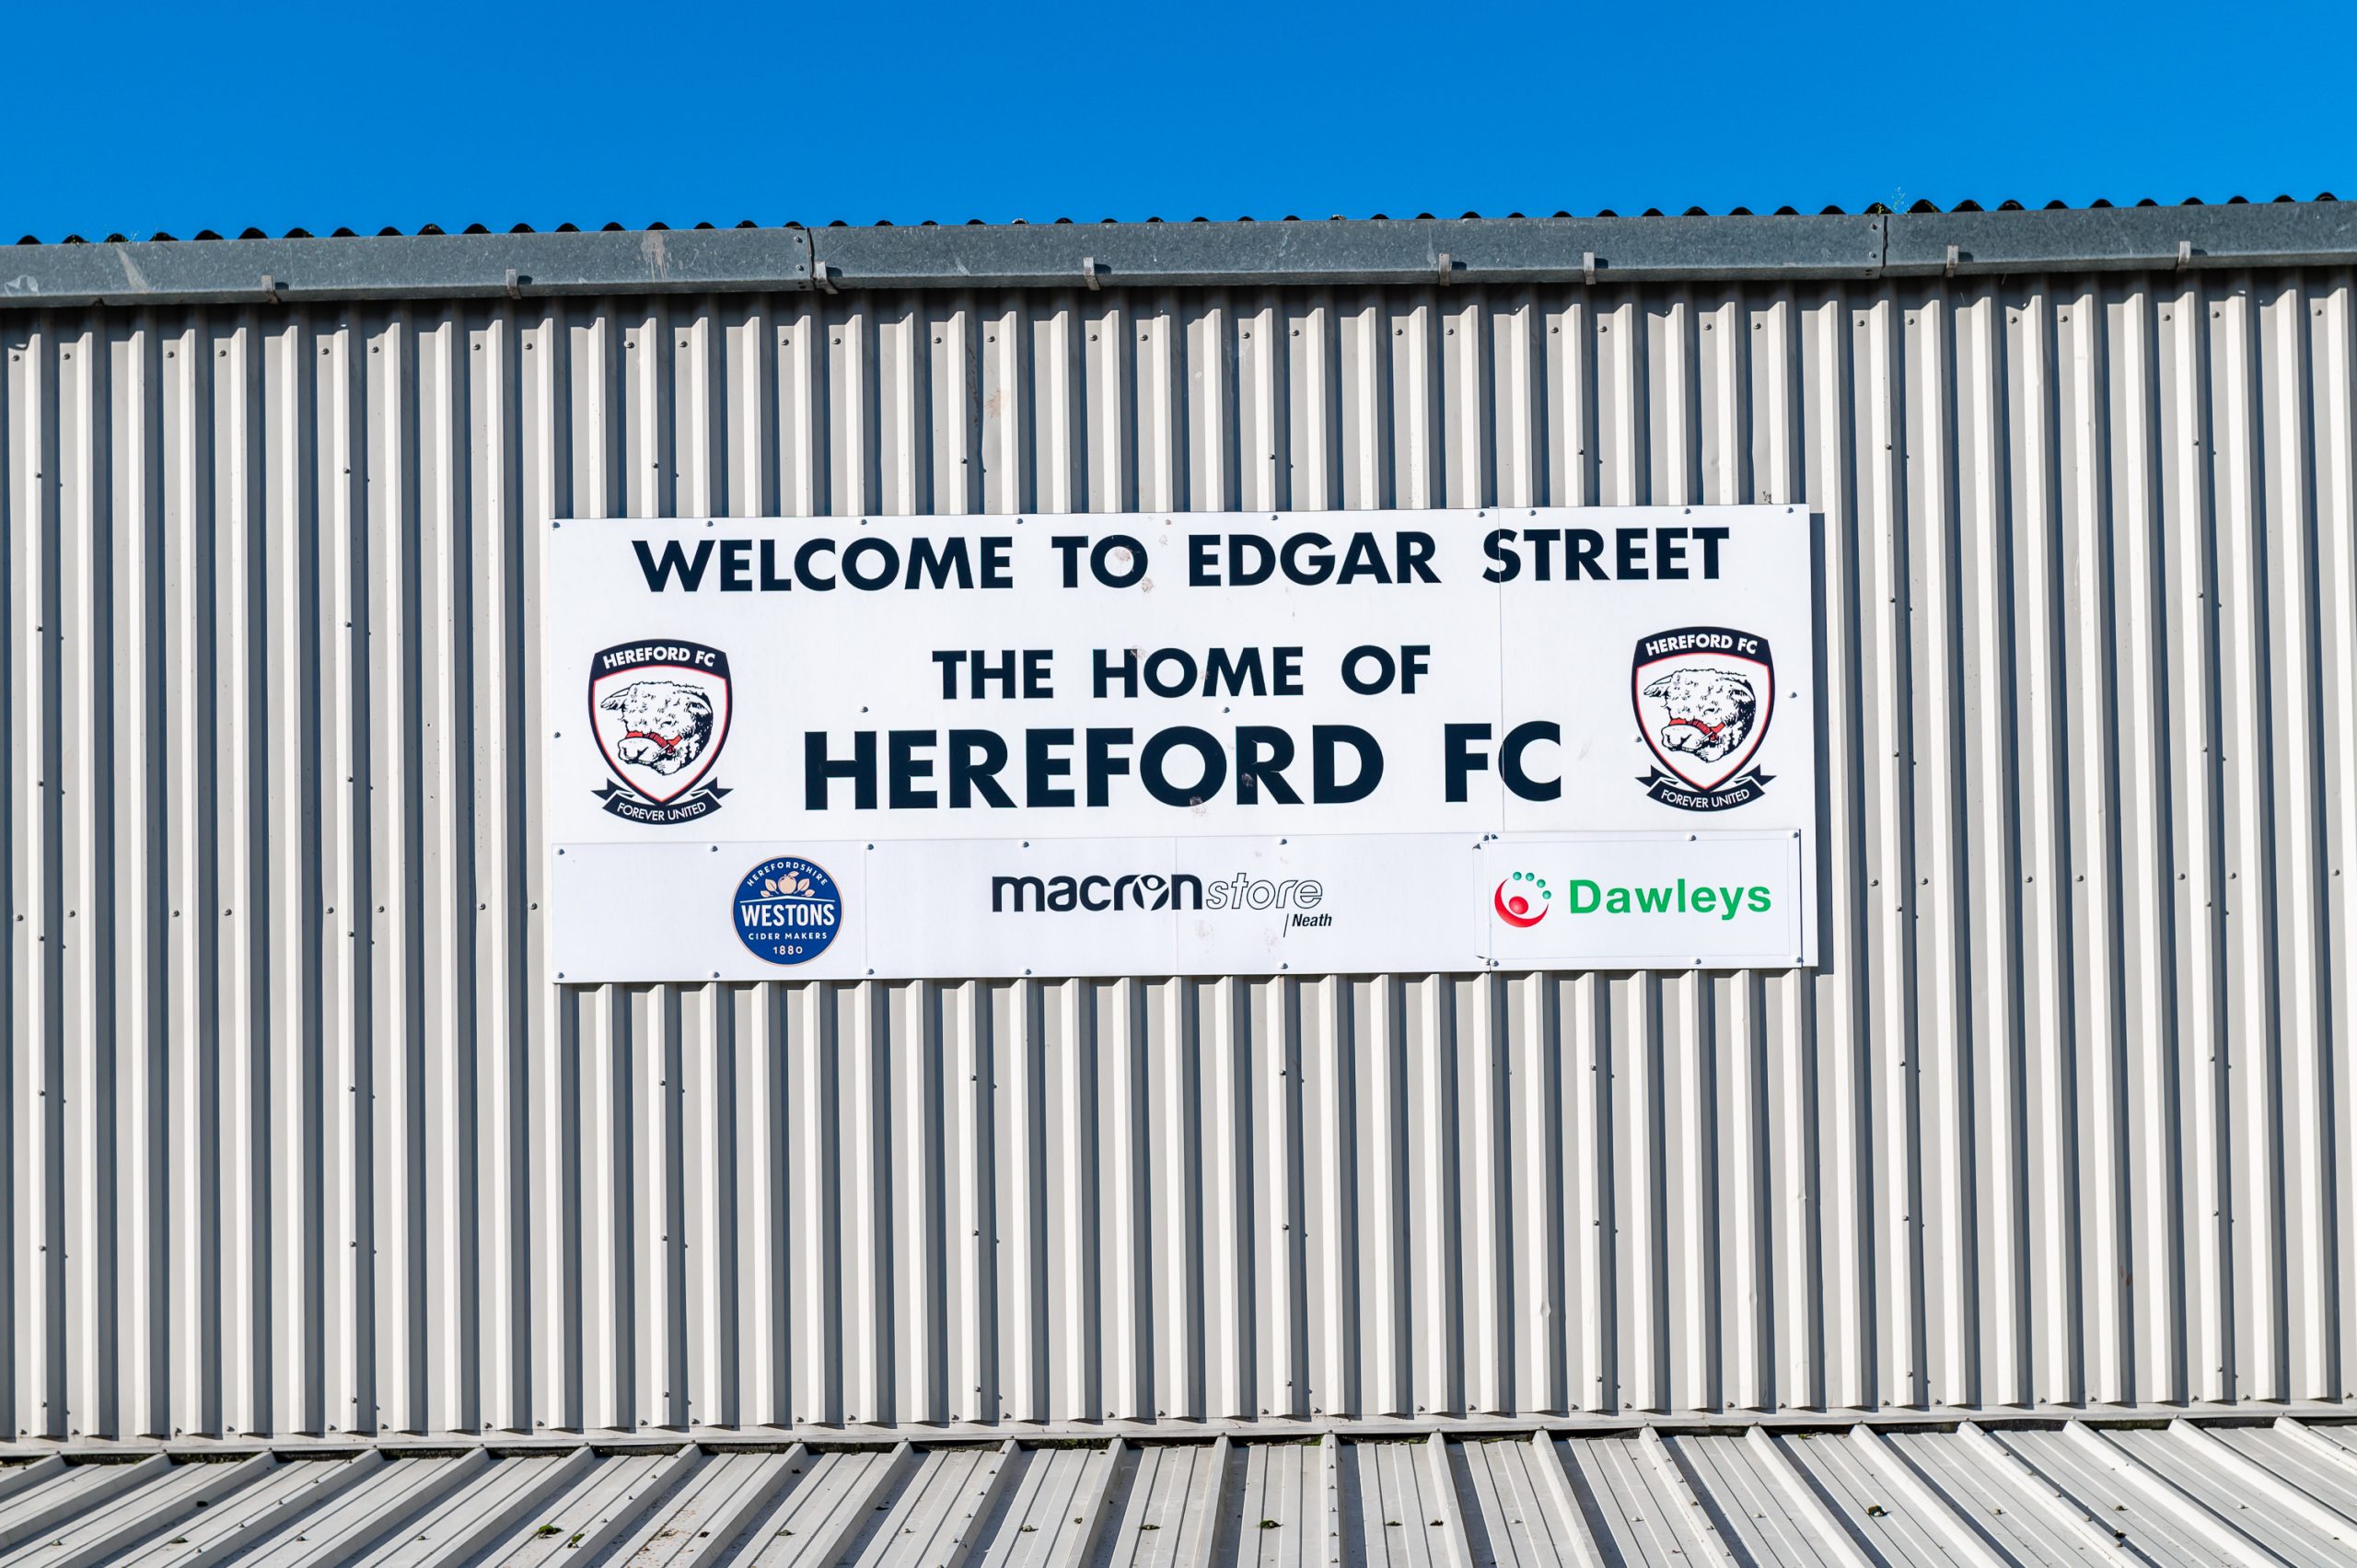 NEWS | Hereford FC to get place on Hereford’s Monopoly Board to mark 50th anniversary of famous victory over Newcastle